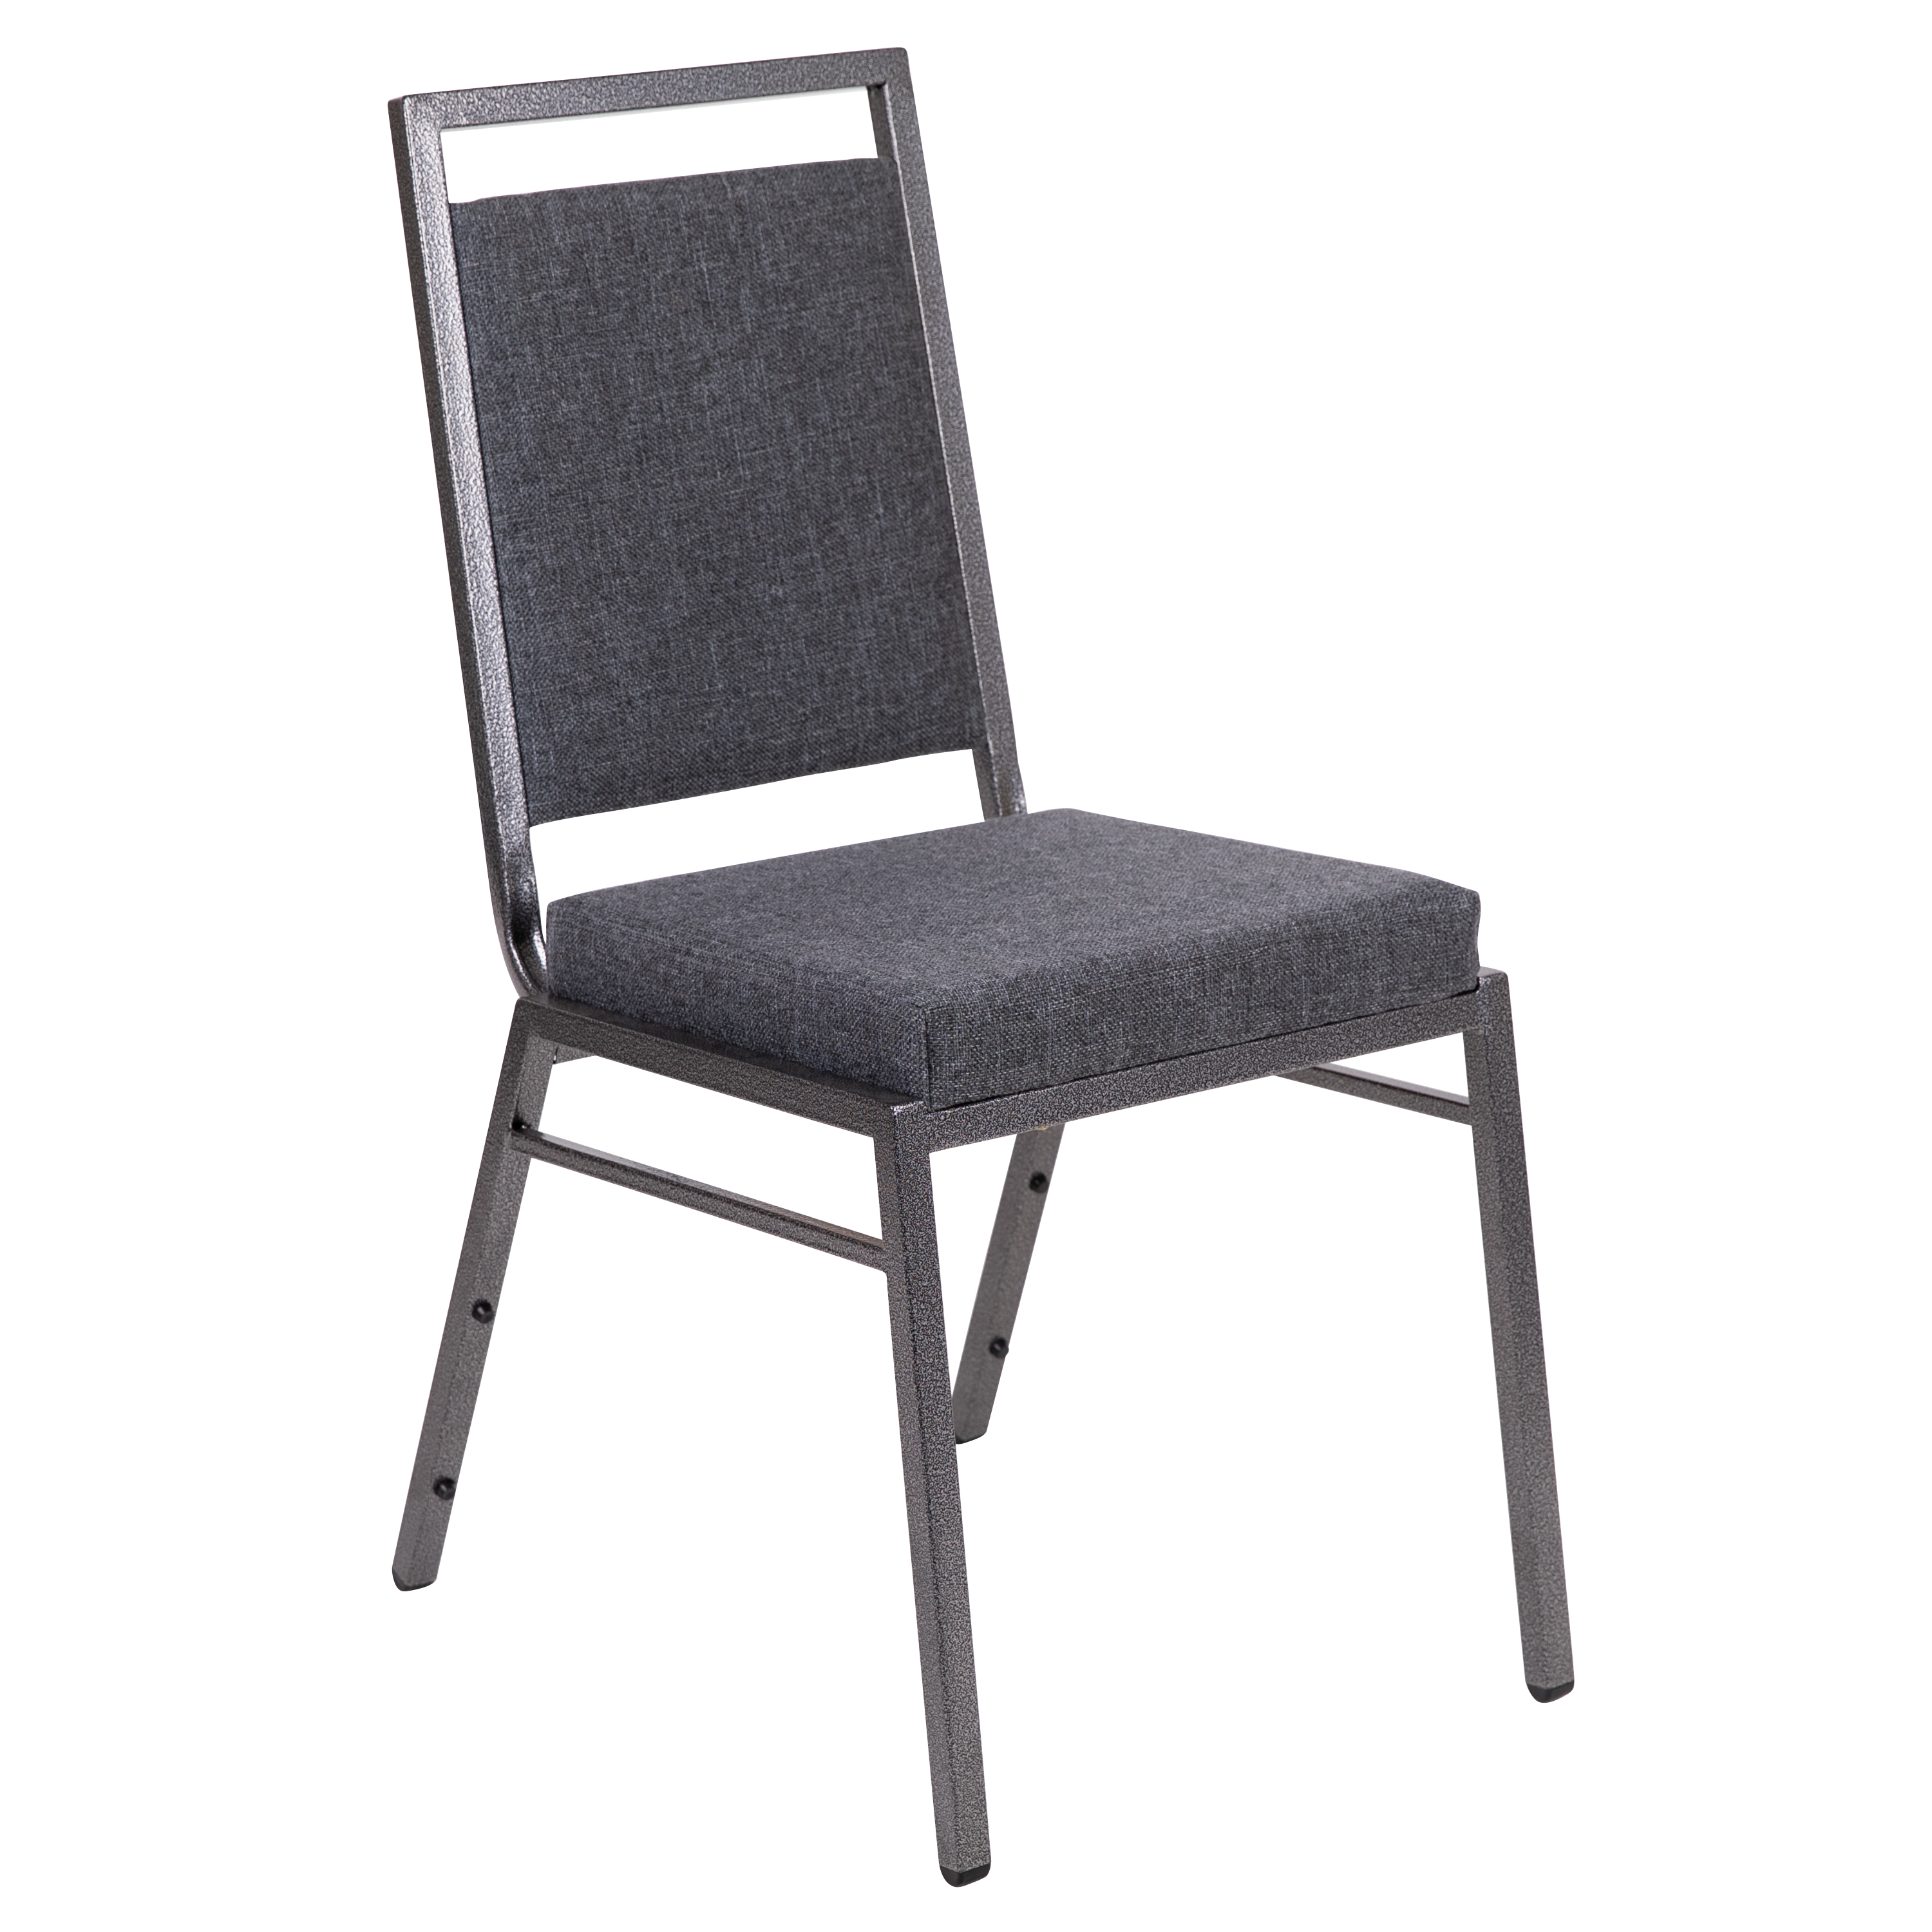 Flash Furniture FD-LUX-SIL-DKGY-GG Hercules Square Back Dark Gray Fabric Stacking Banquet Chair - Silvervein Frame